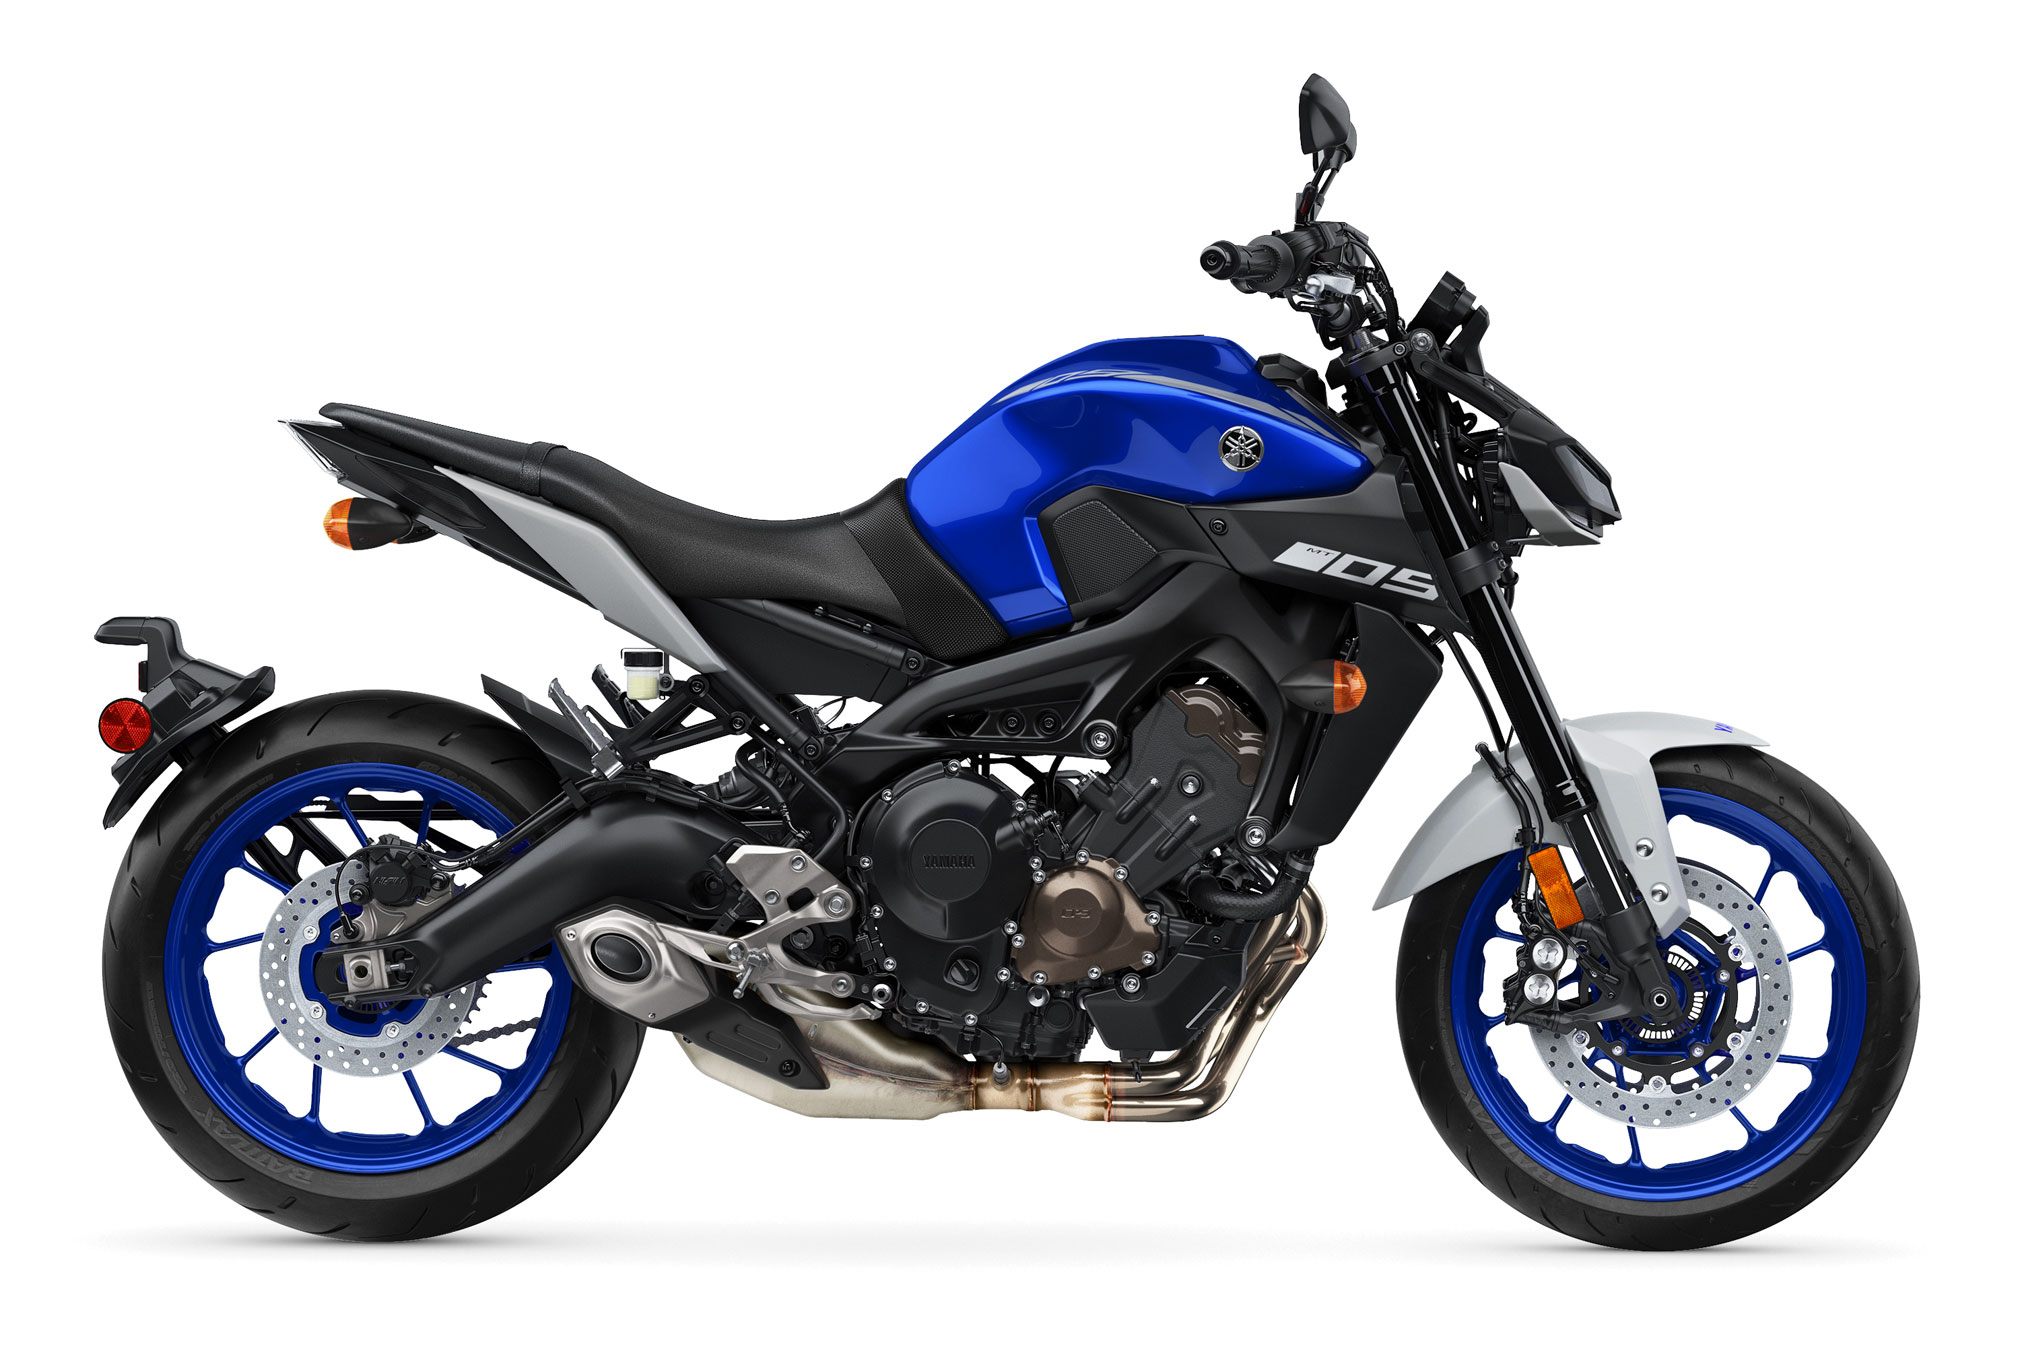 2020 Yamaha MT-09 For Sale in Orlando, FL - Cycle Trader